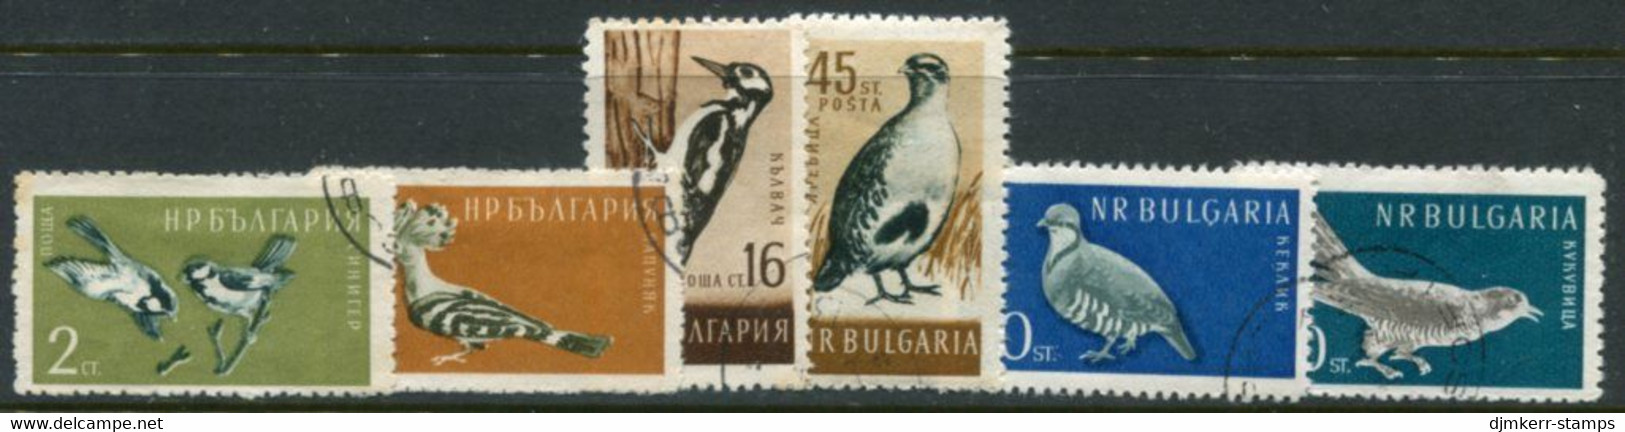 BULGARIA 1959 Birds Used.  Michel 1116-21 - Used Stamps